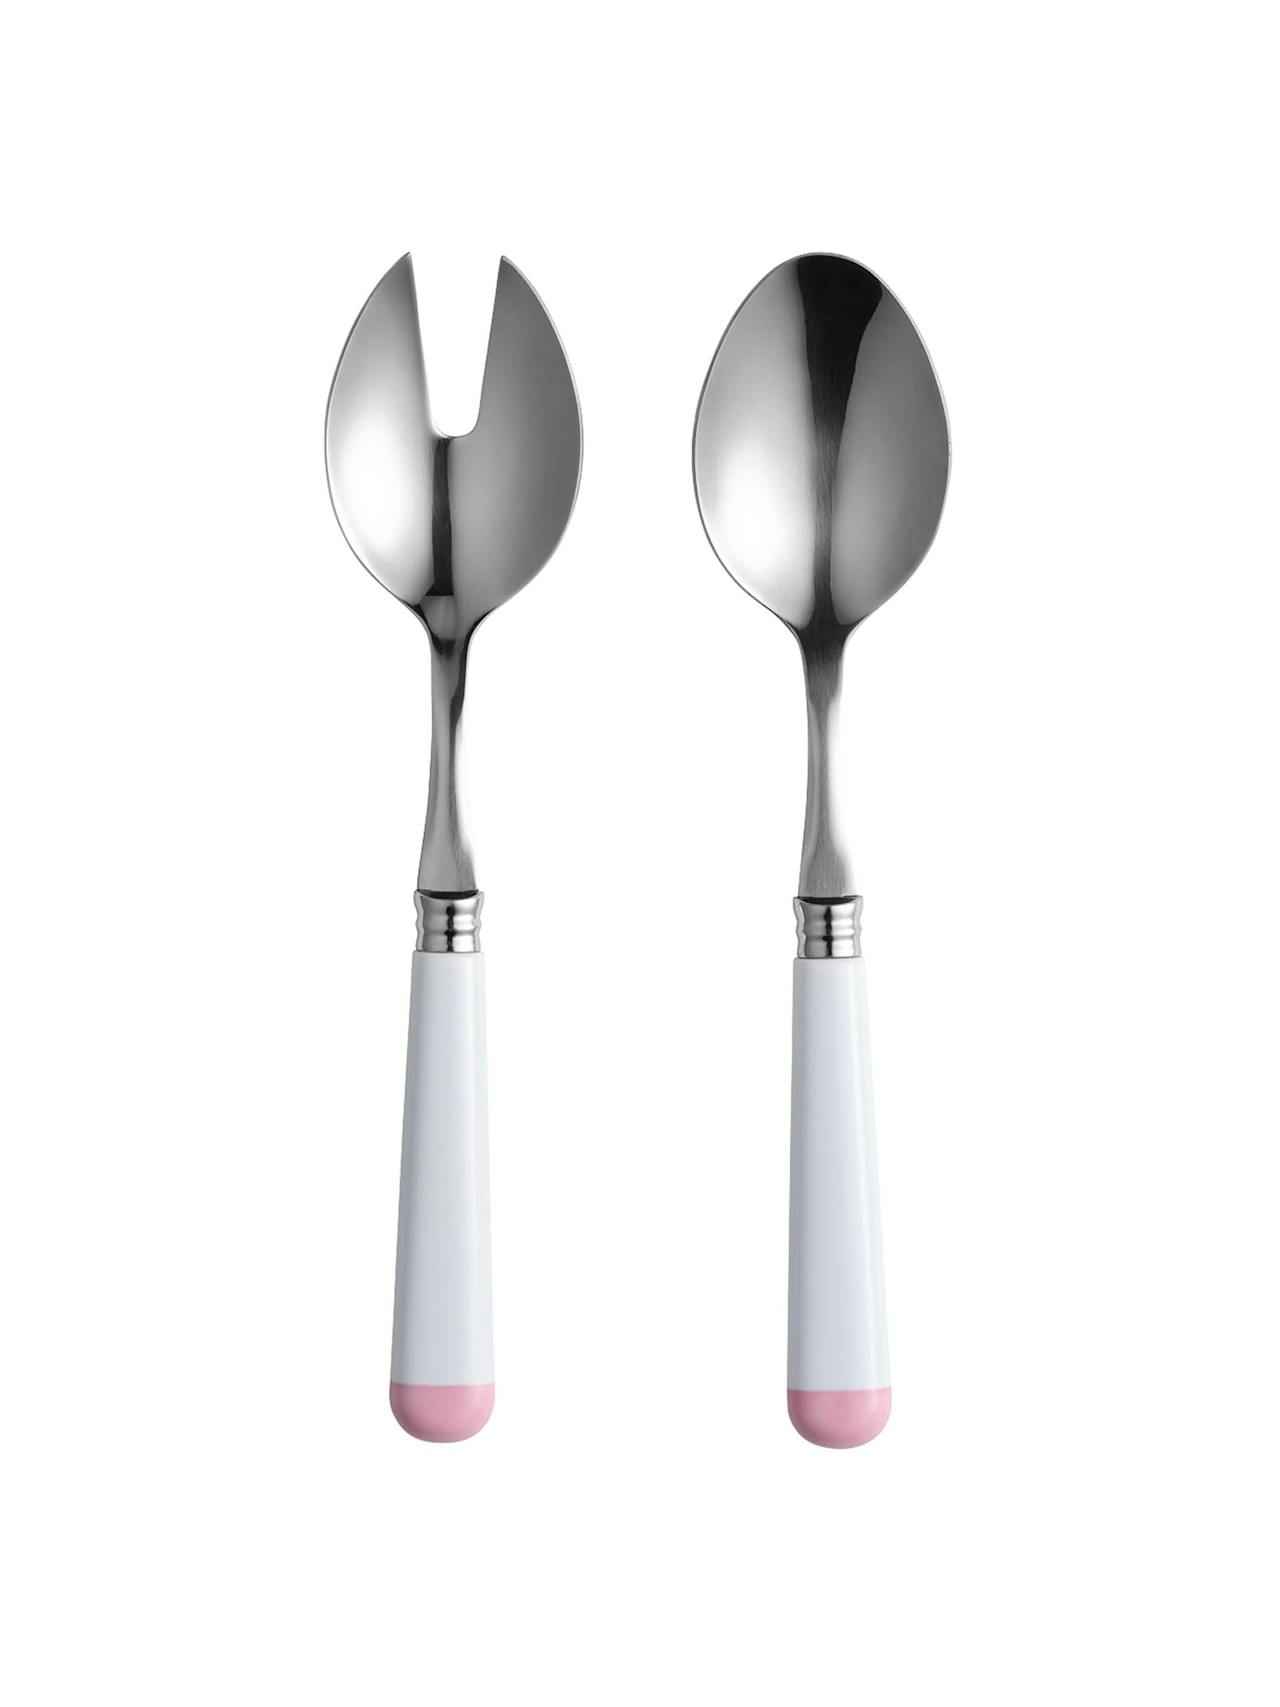 White and pink salad servers